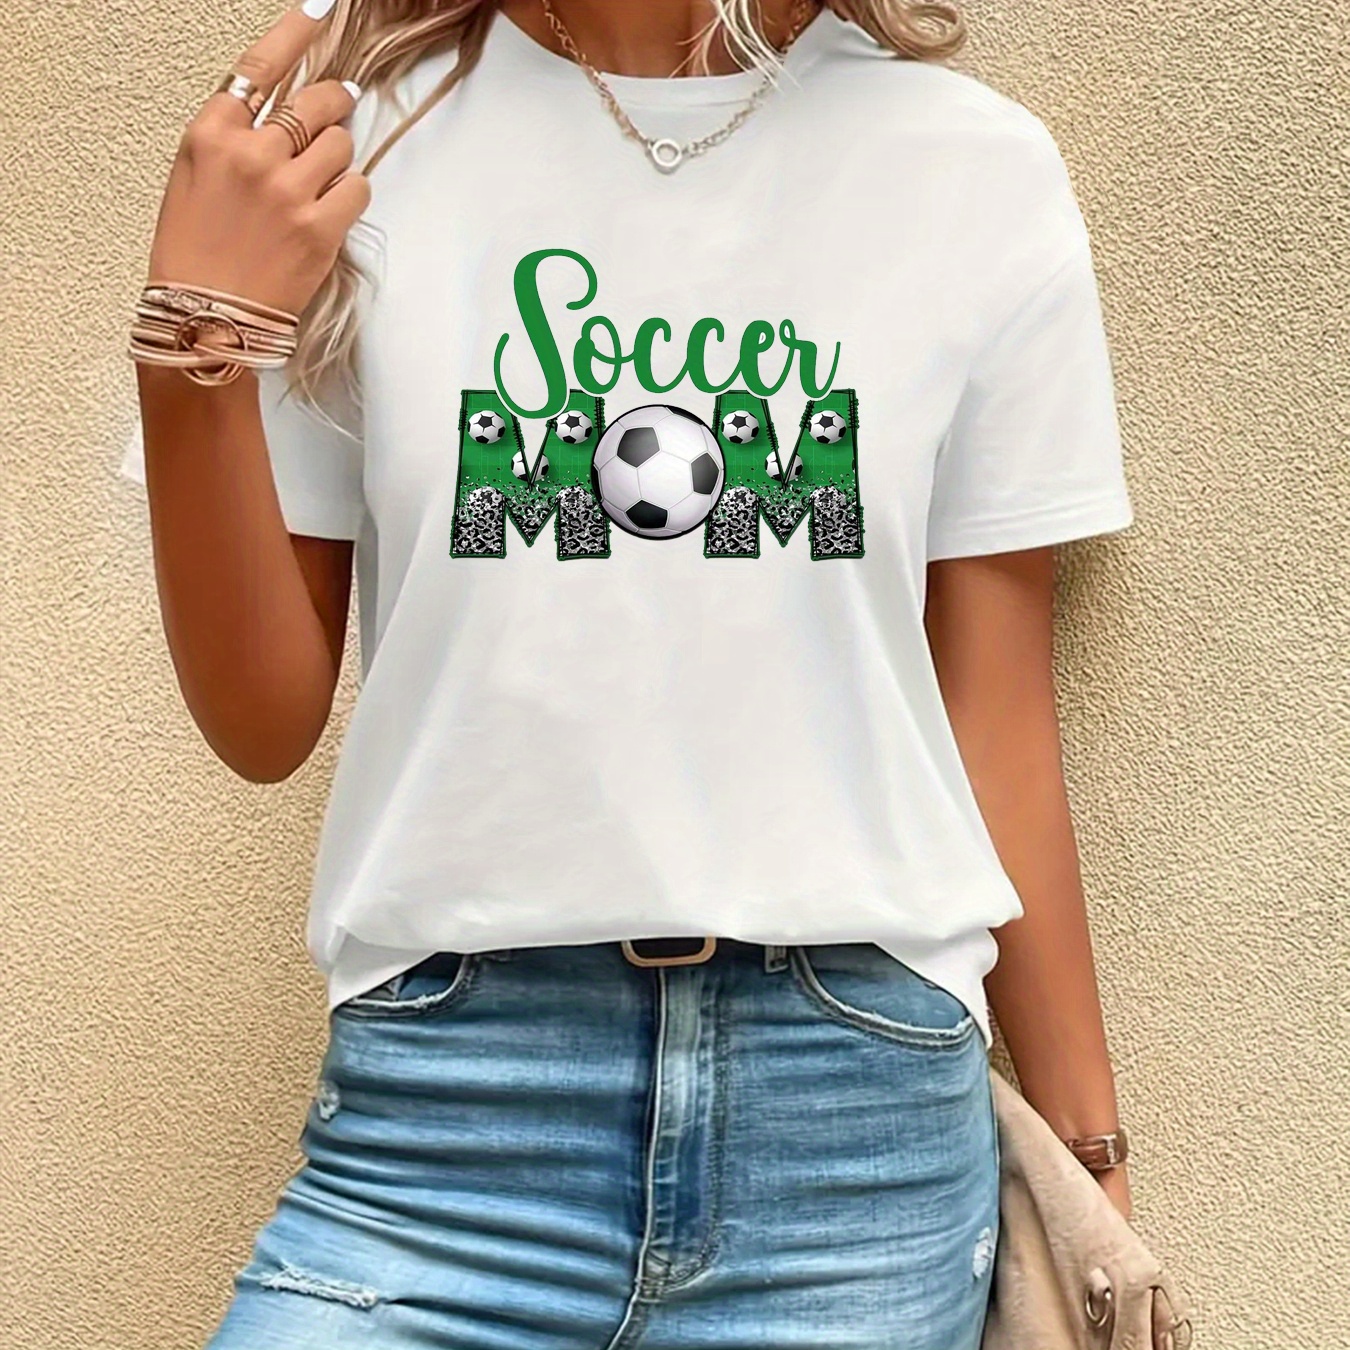 

Soccor Mom Print T-shirt, Casual Crew Neck Short Sleeve Top For Spring & Summer, Women's Clothing